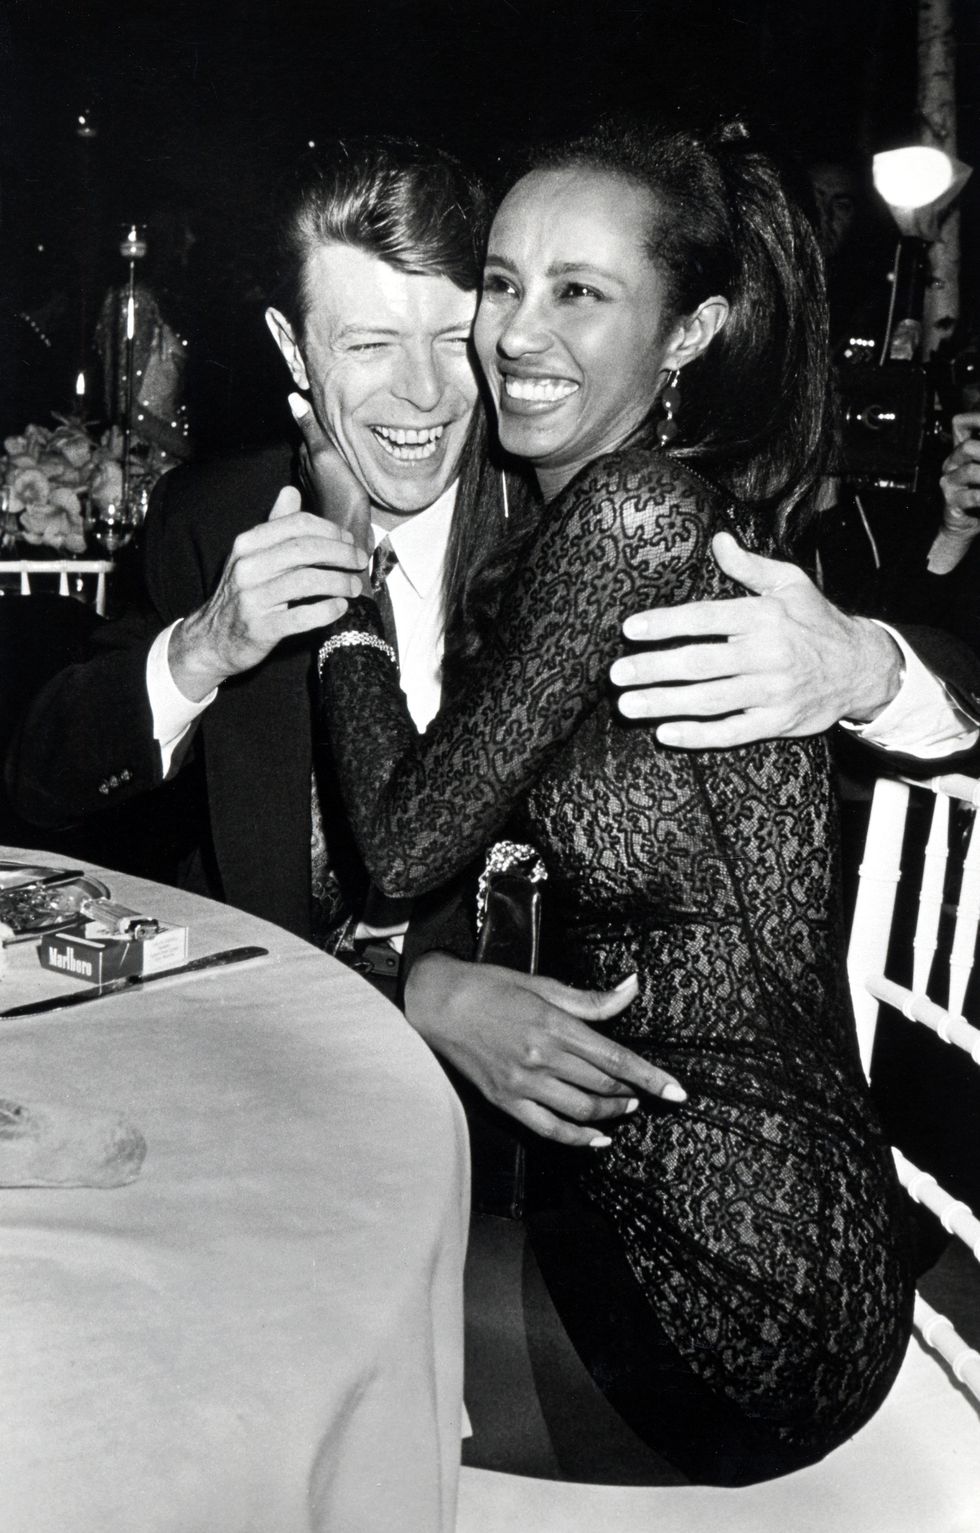 David Bowie and Iman laughing and embracing